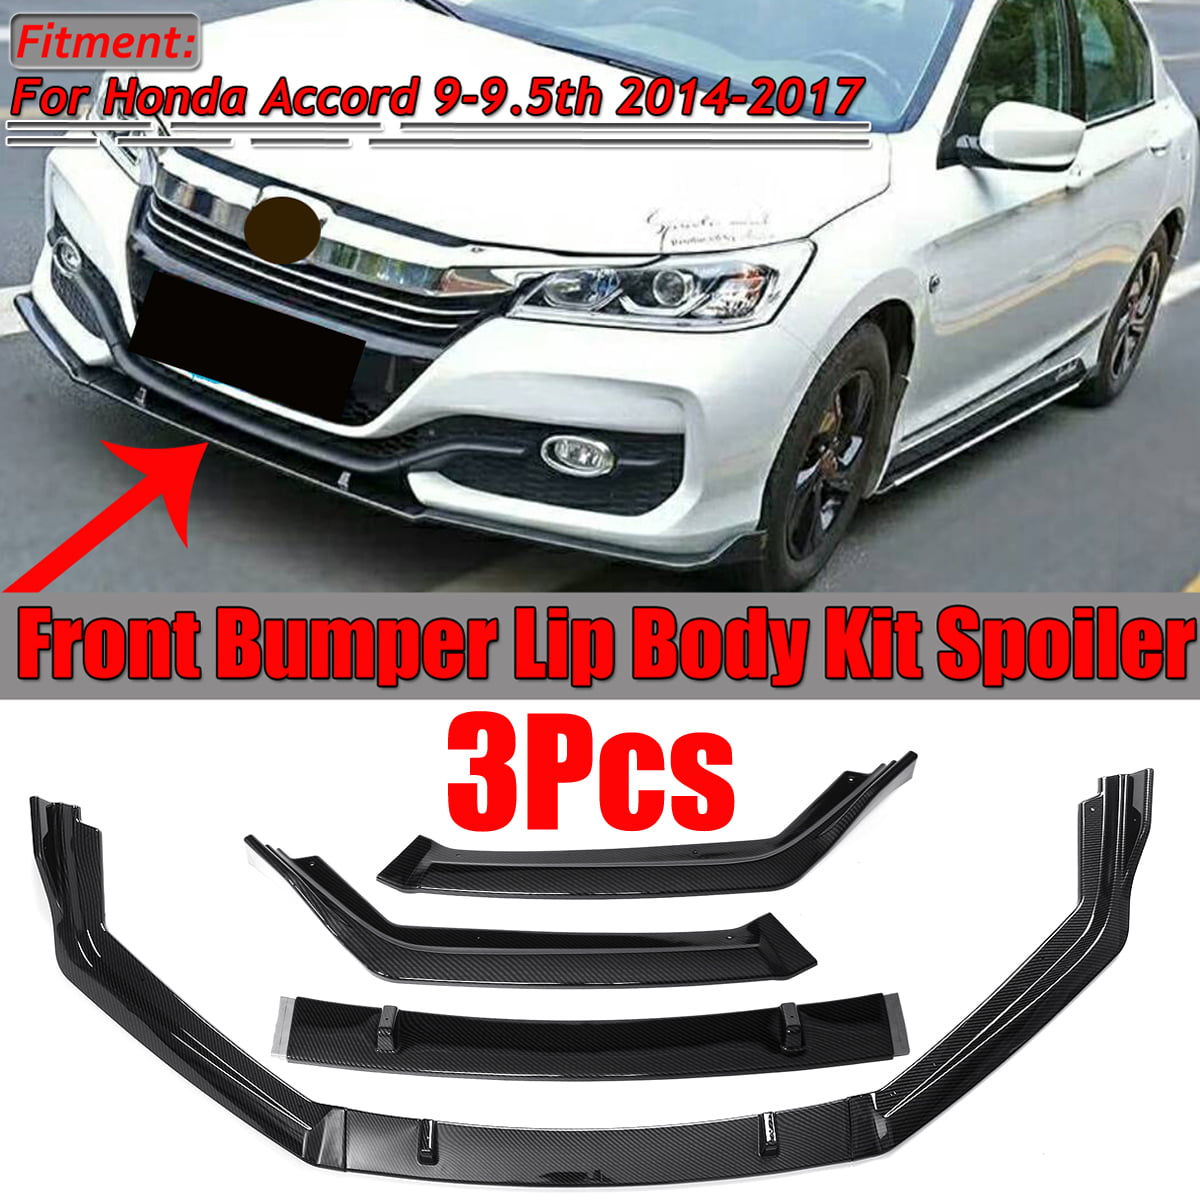 Back Row Air Outlet Vent Decor Carbon Fiber FOR Honda 9 9.5th Accord 2014-2017